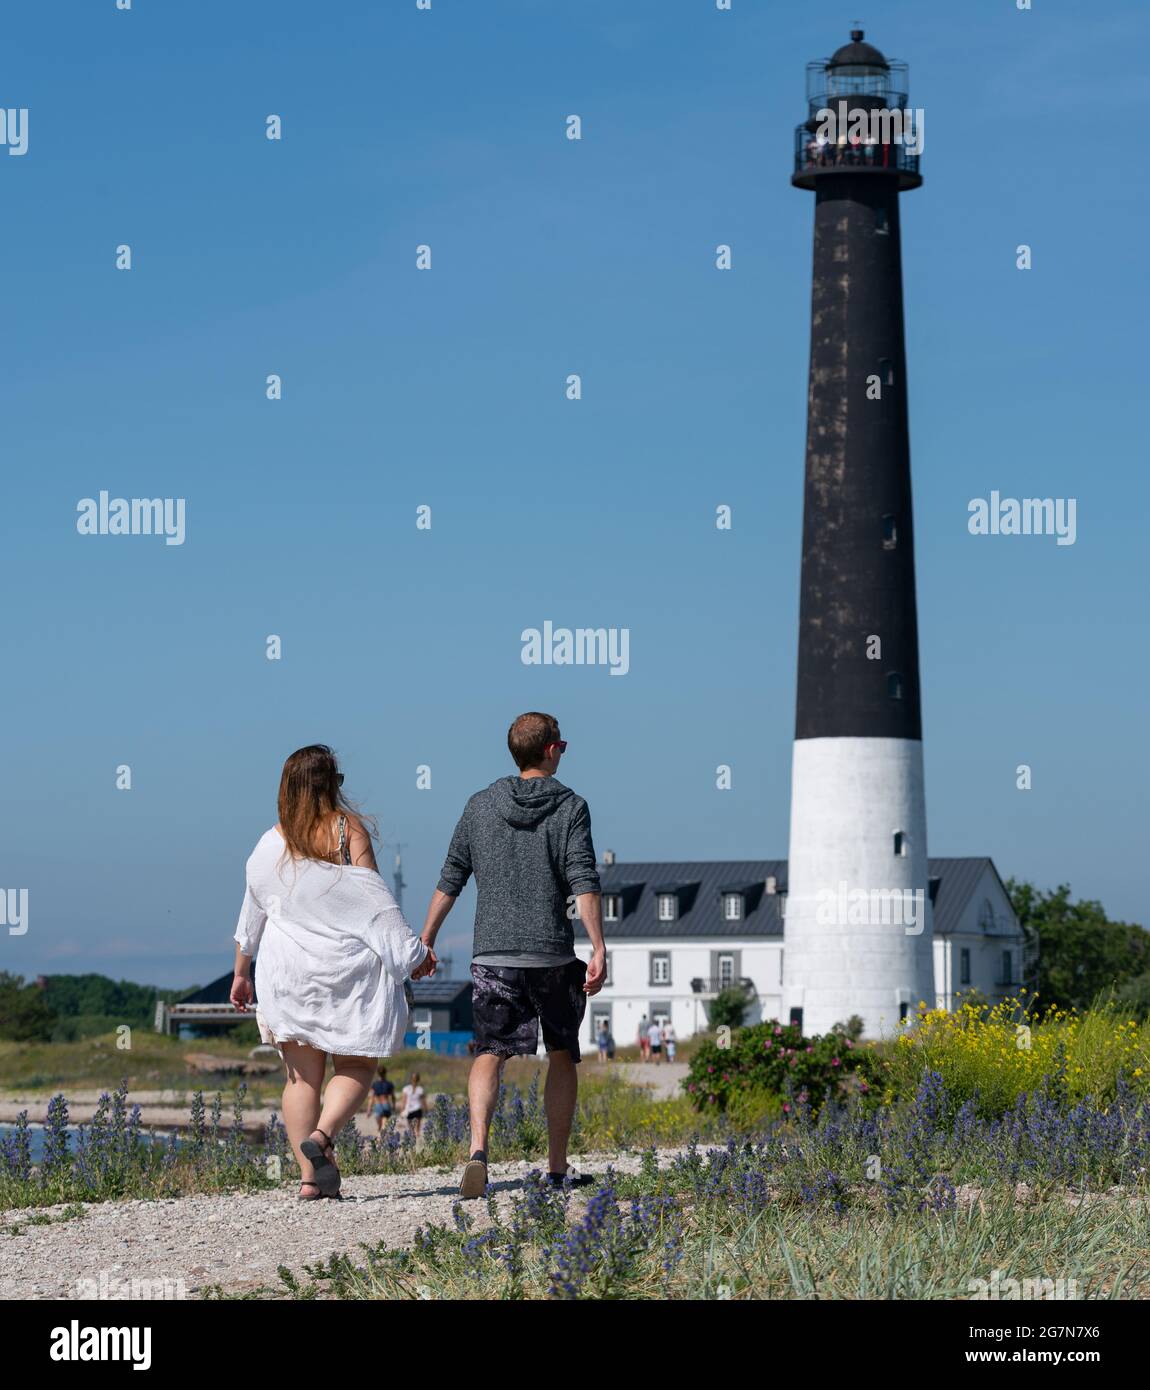 Sorvesaar,Estonia-06.21.2021: Lighthouse at the end of Sorve saar peninsula. Tall beacon of light for the ship to guide them. Couple walking up to the tall tower holding hands.  Stock Photo